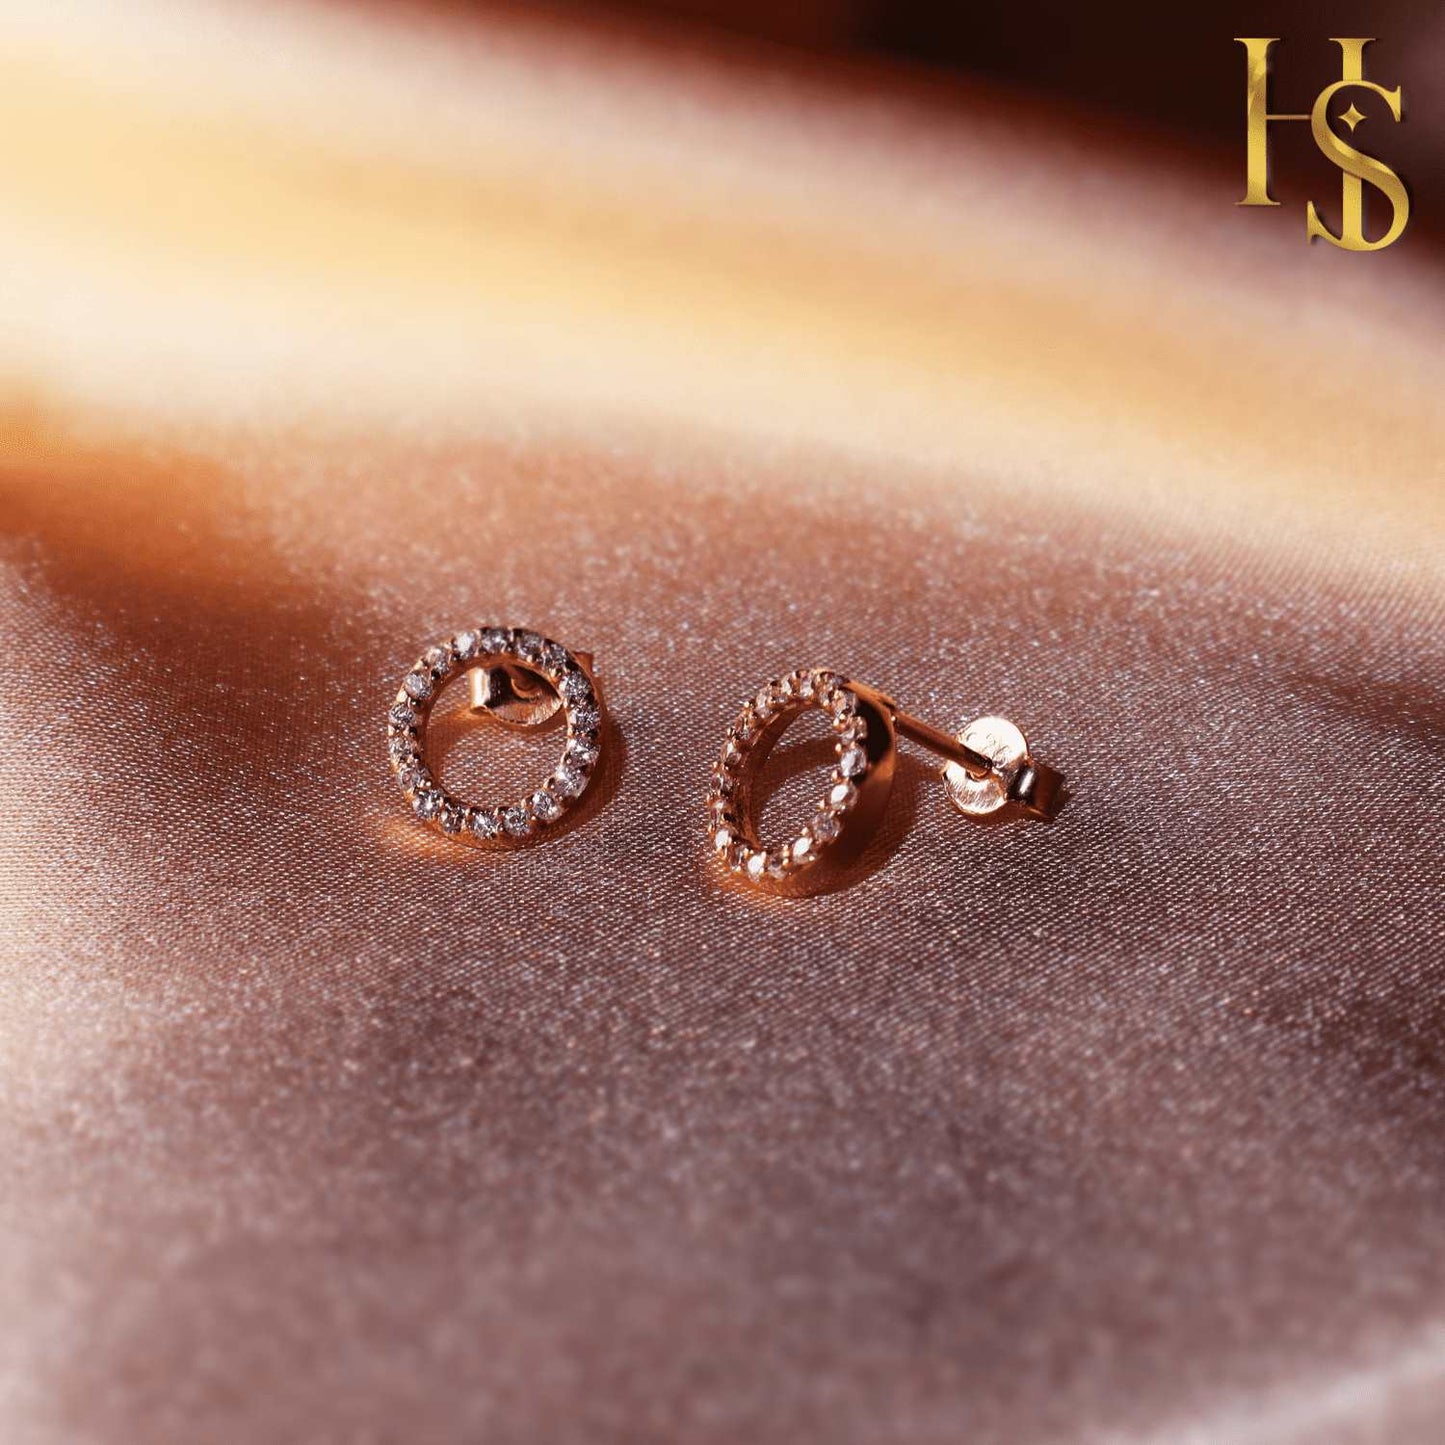 Circle of Life Earrings - 92.5 Silver in Rose Gold - Unity, Wholeness and Completeness -18K Rose Gold Finish